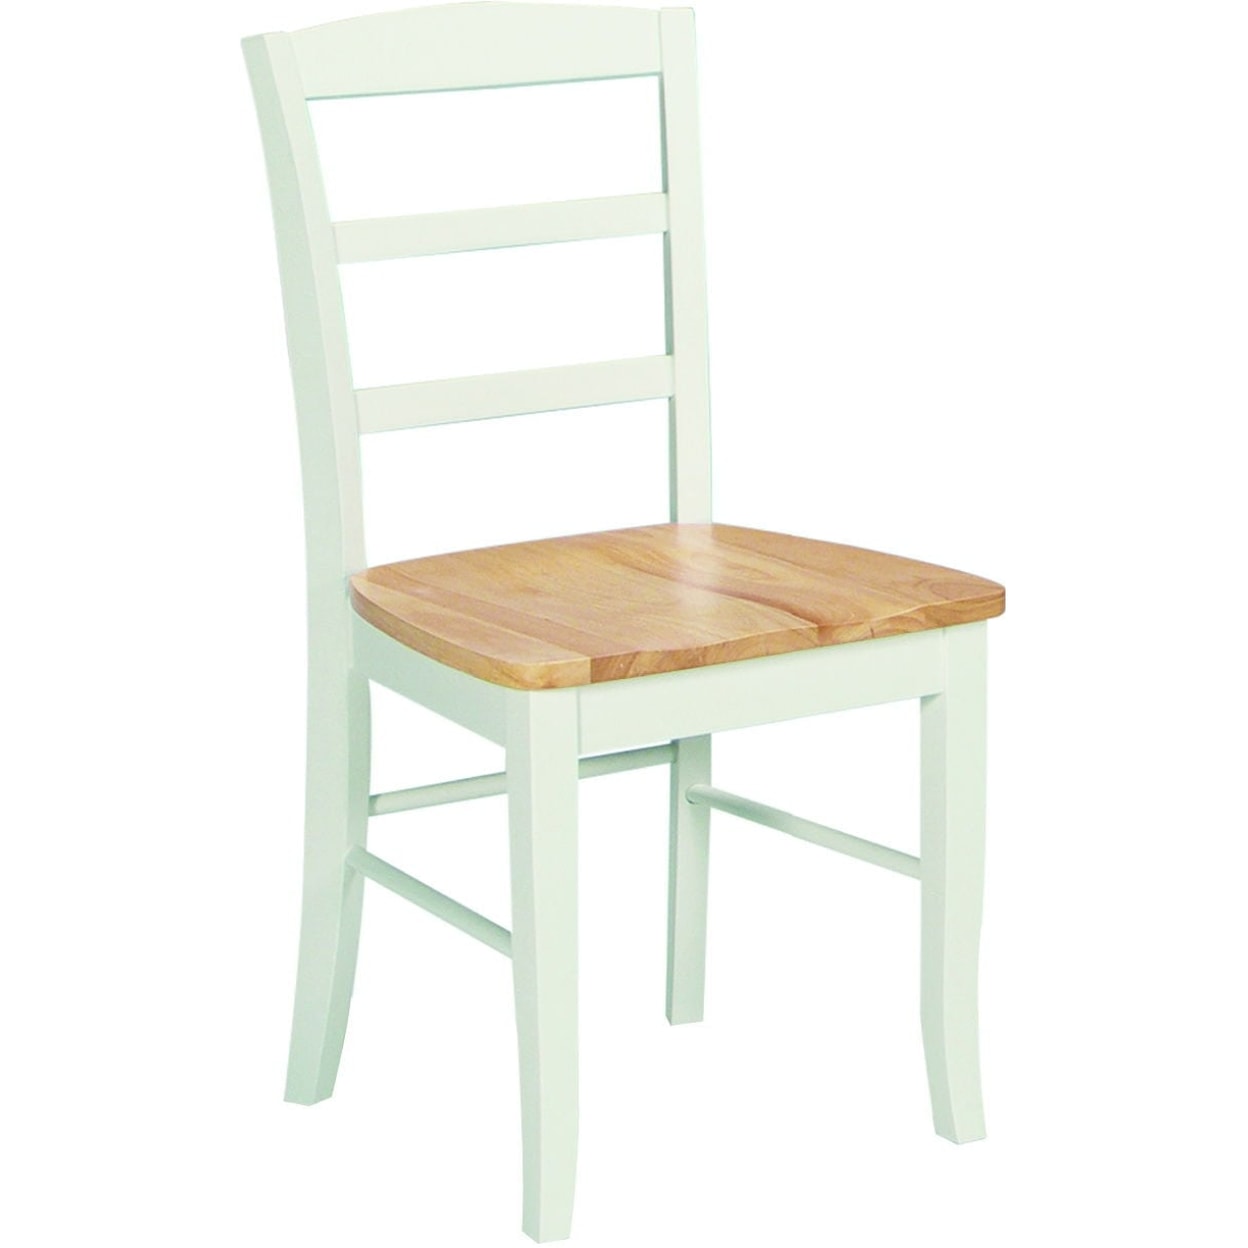 John Thomas Dining Essentials Madrid Chair in Natural / White